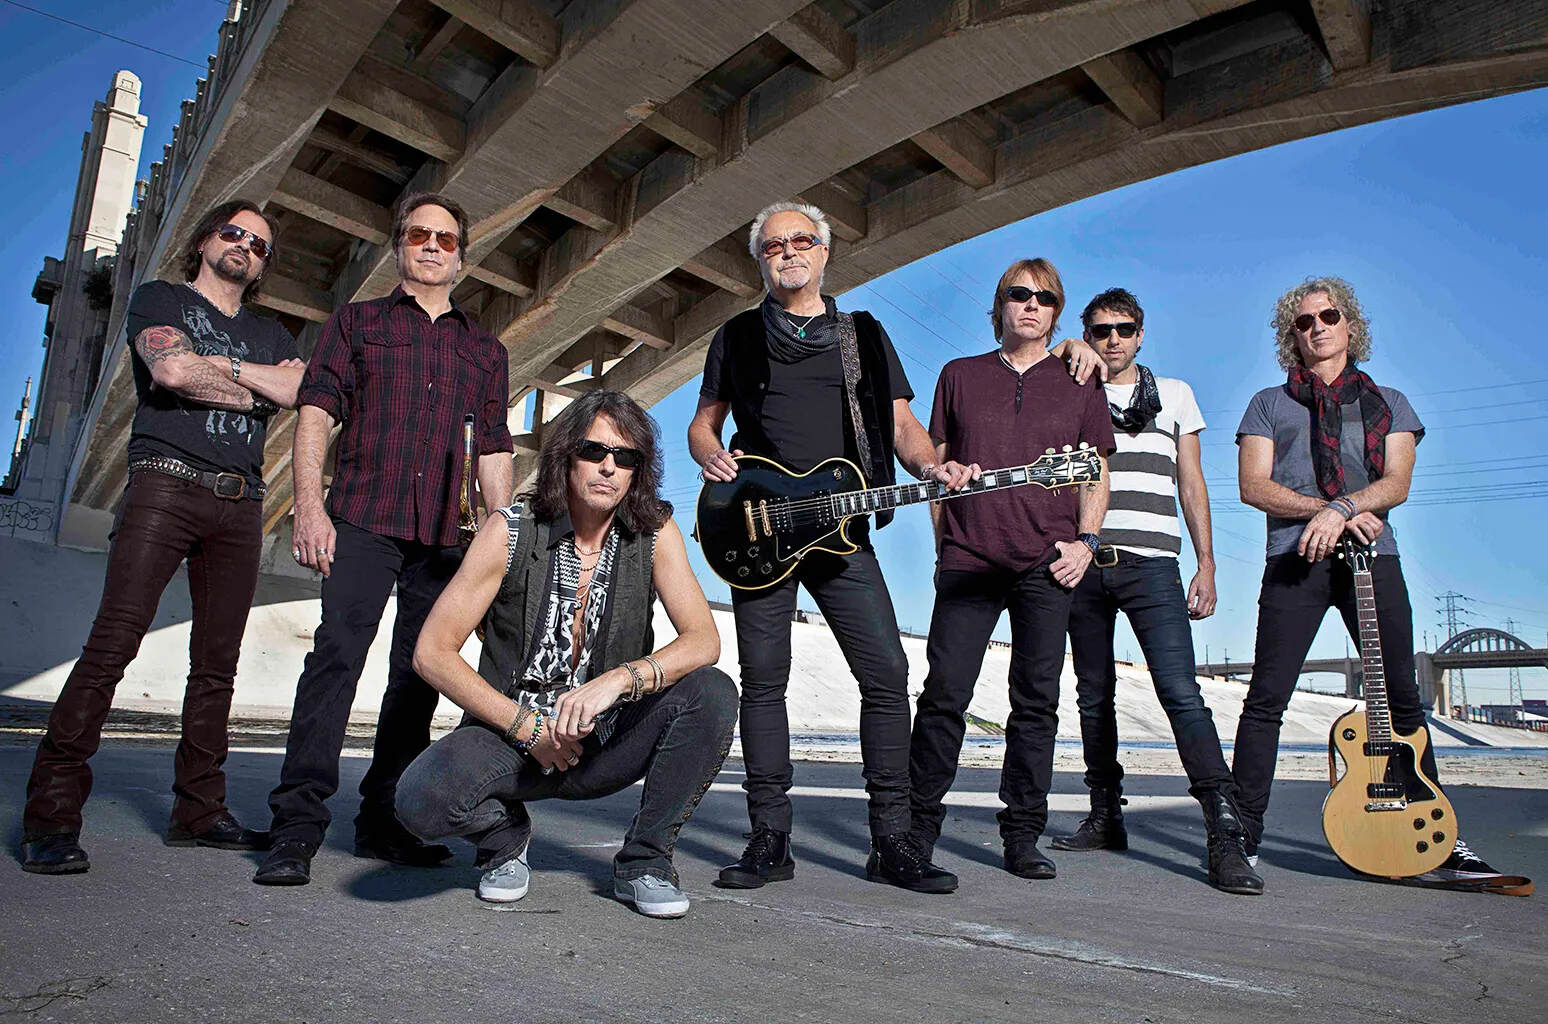 Who Is The Lead Singer Of Foreigner